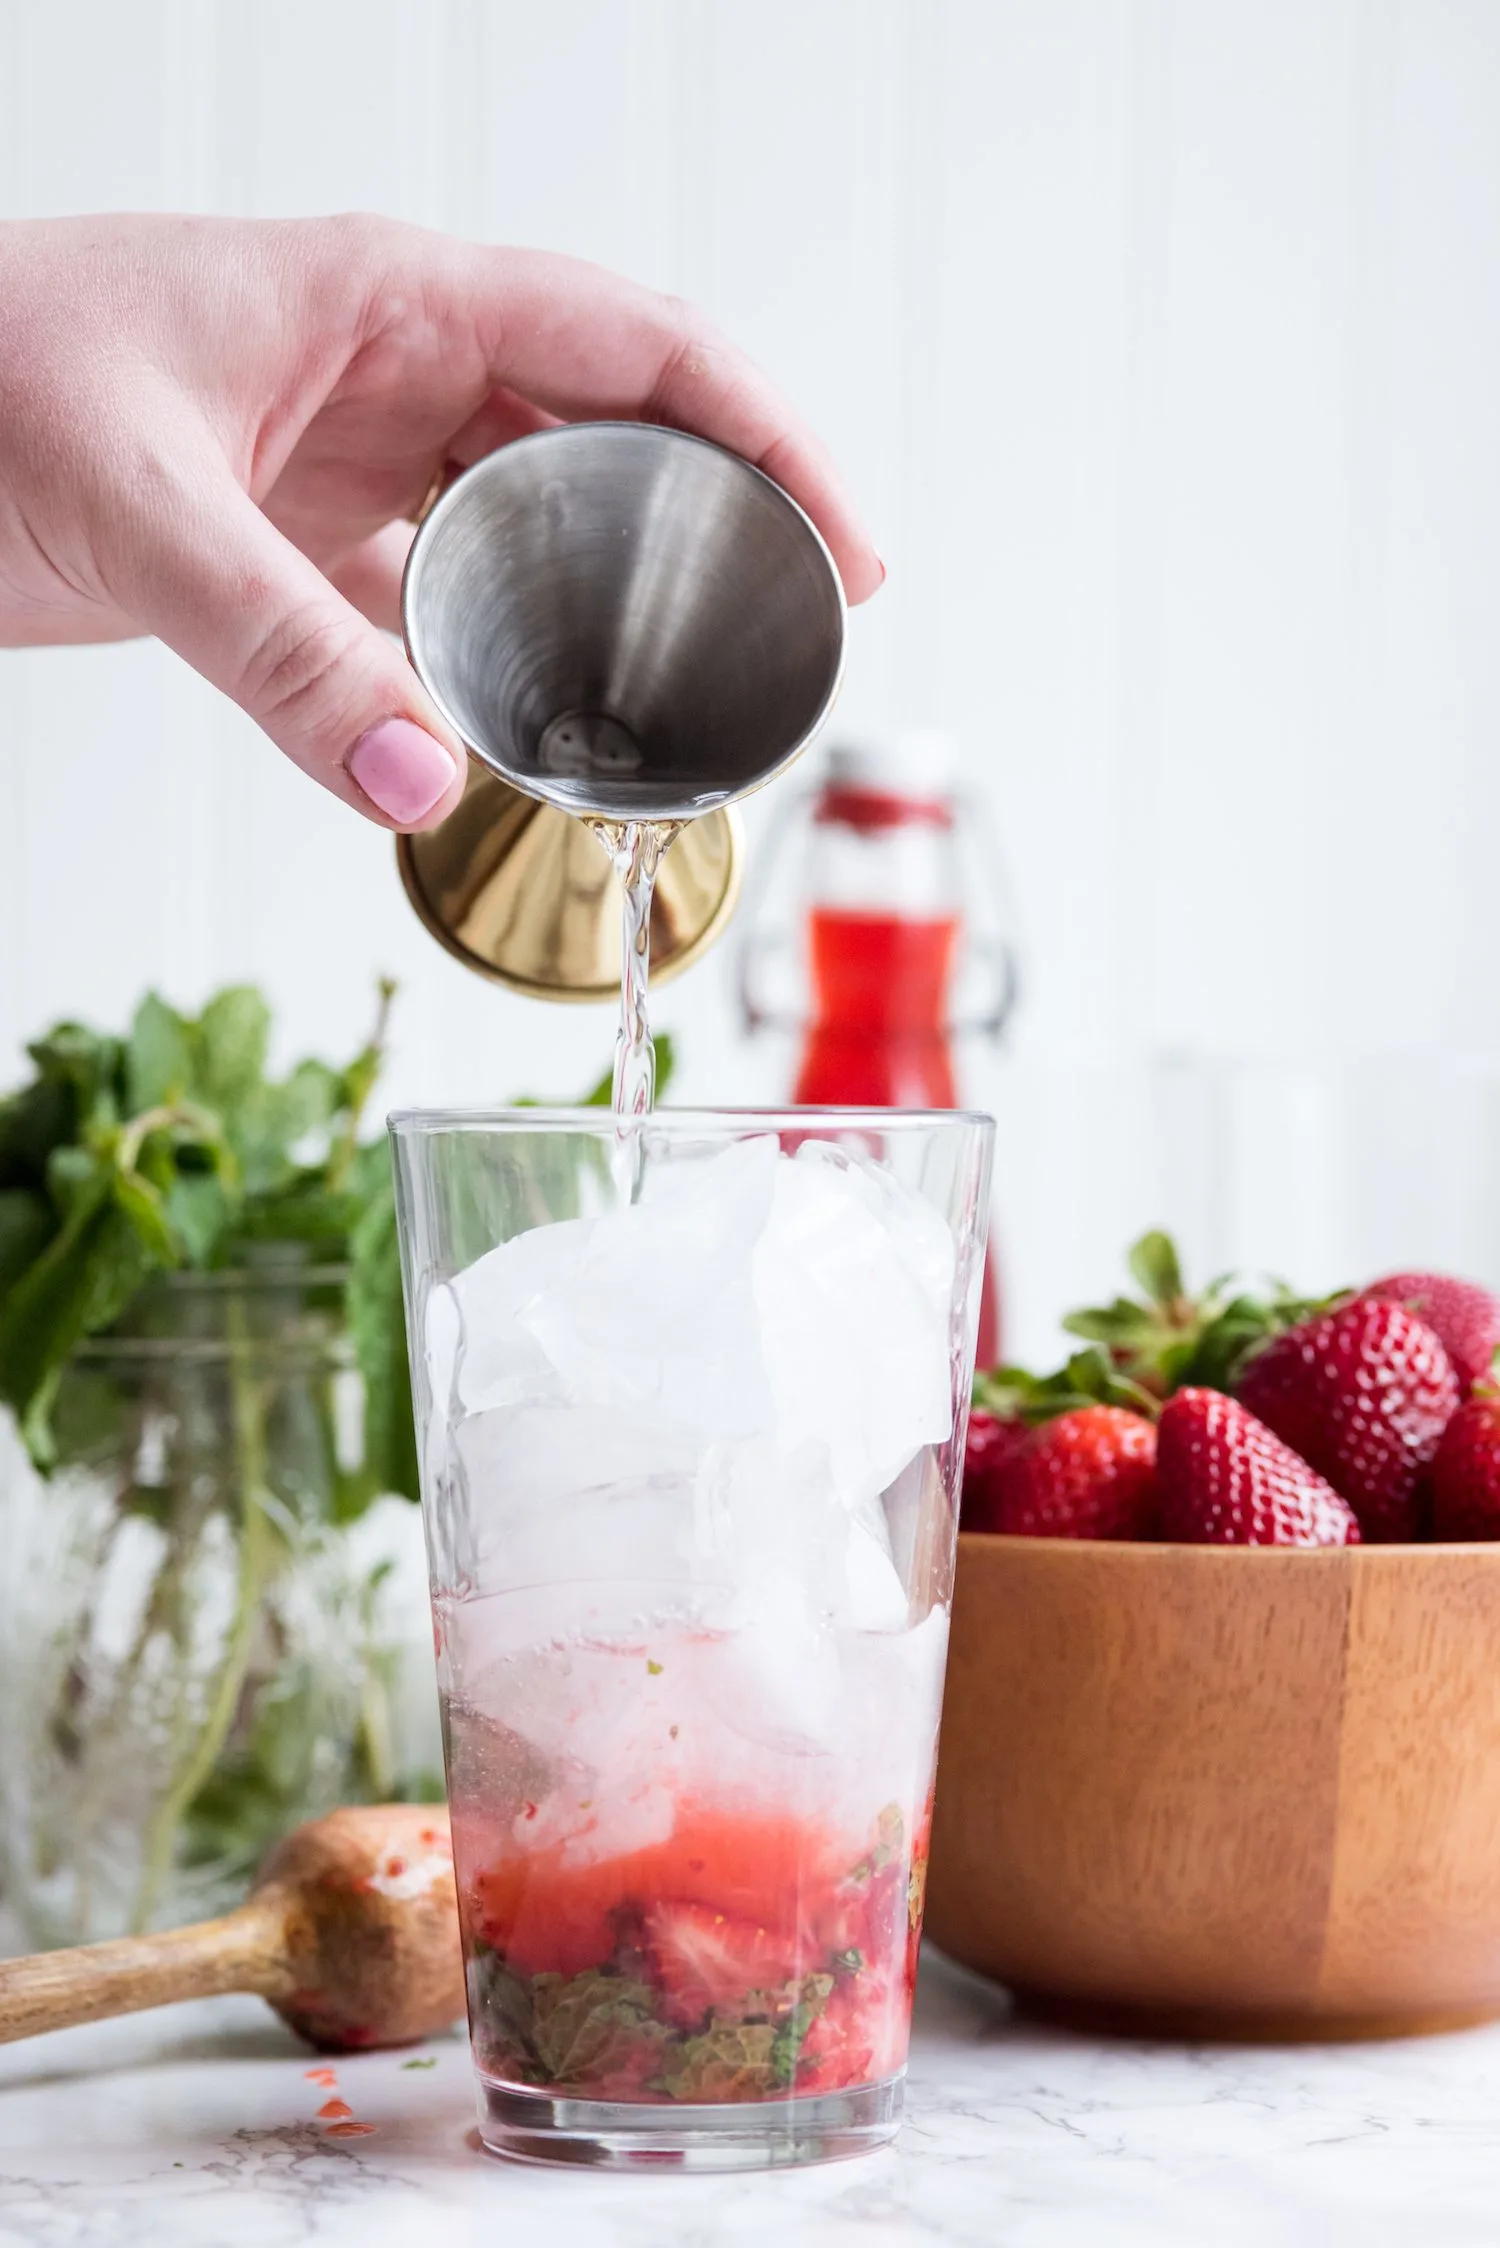 The Ultimate Strawberry Mojito Recipe | Cocktail recipes, entertaining tips, party ideas and party menus from @cydconverse